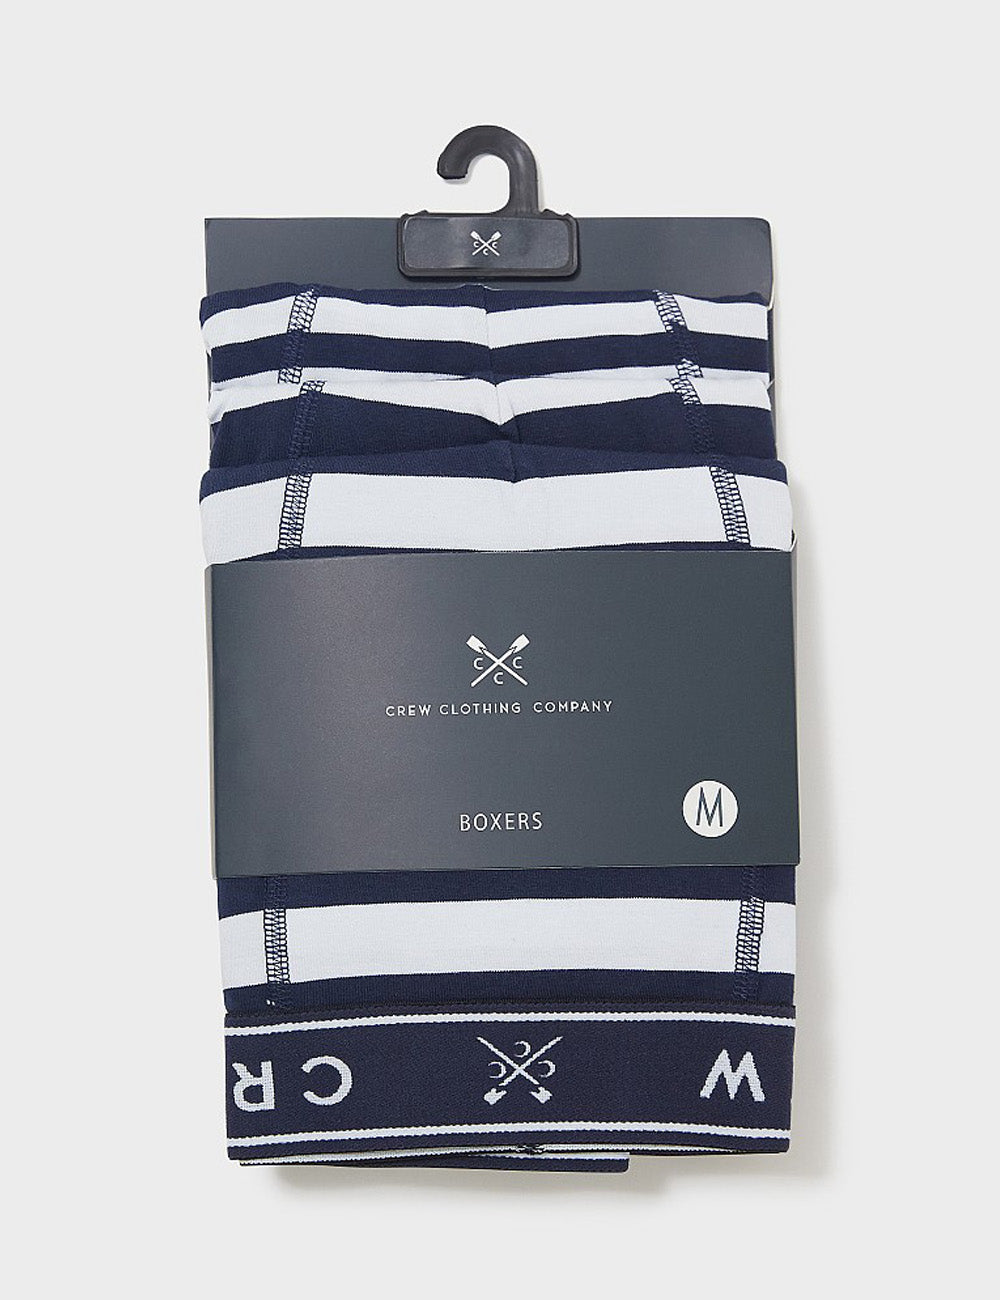 Crew Clothing's Jersey Boxers in packaging on a grey background